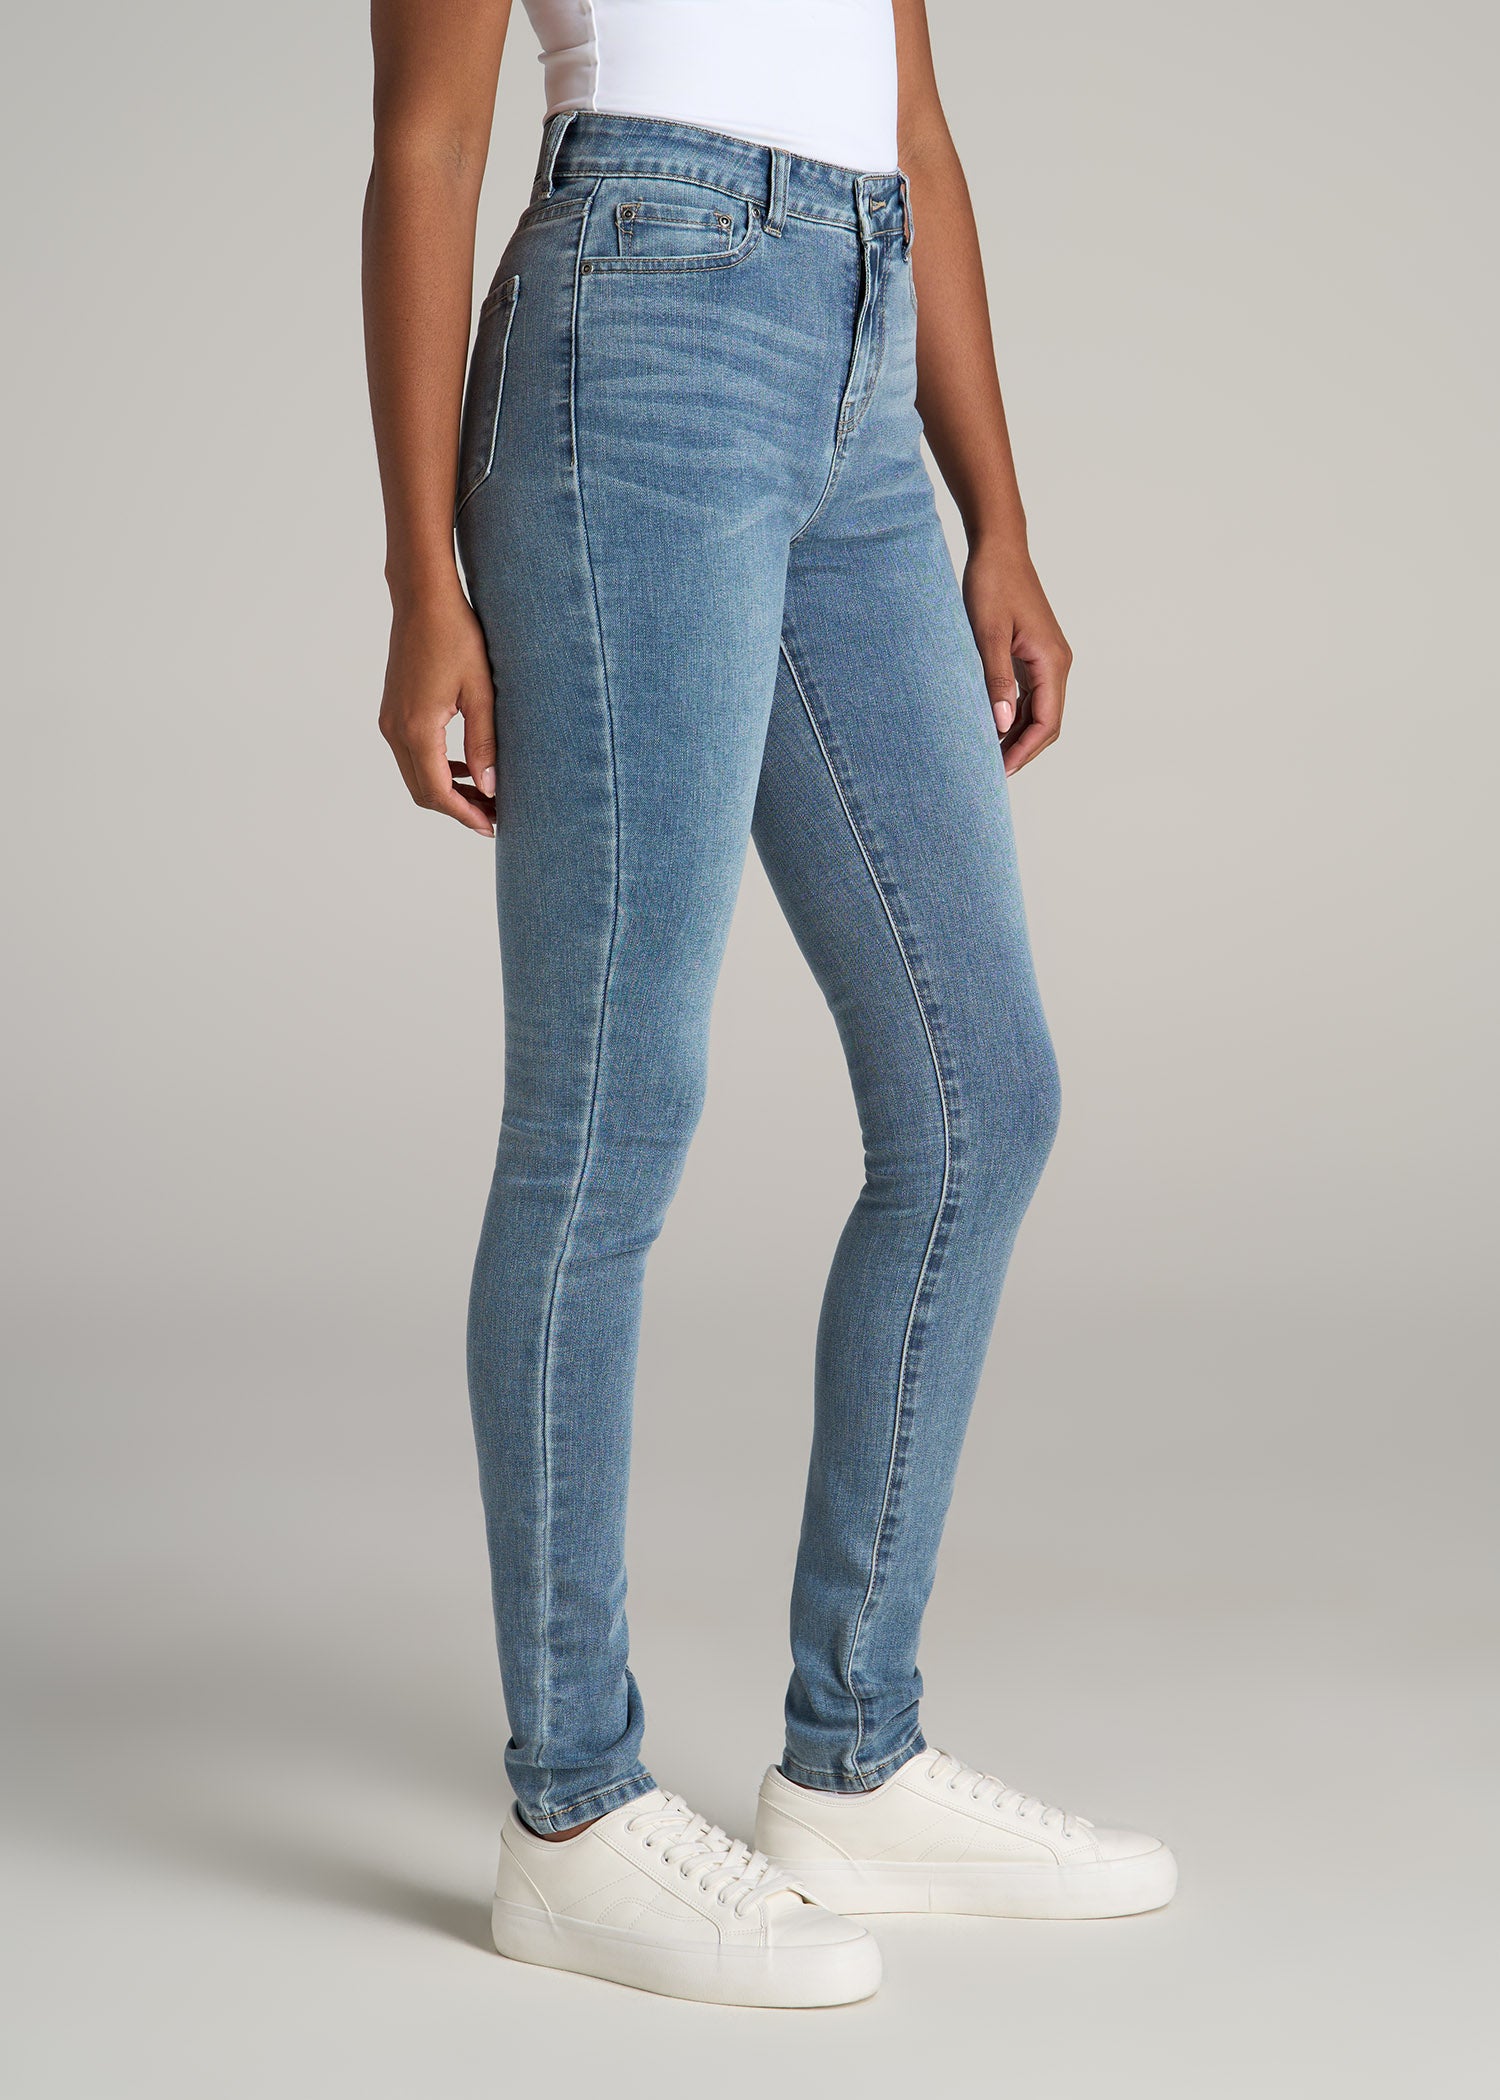 The Best Jeans For Tall Women - The Best 7 Jeans for Really Tall Women that  Actually Fit